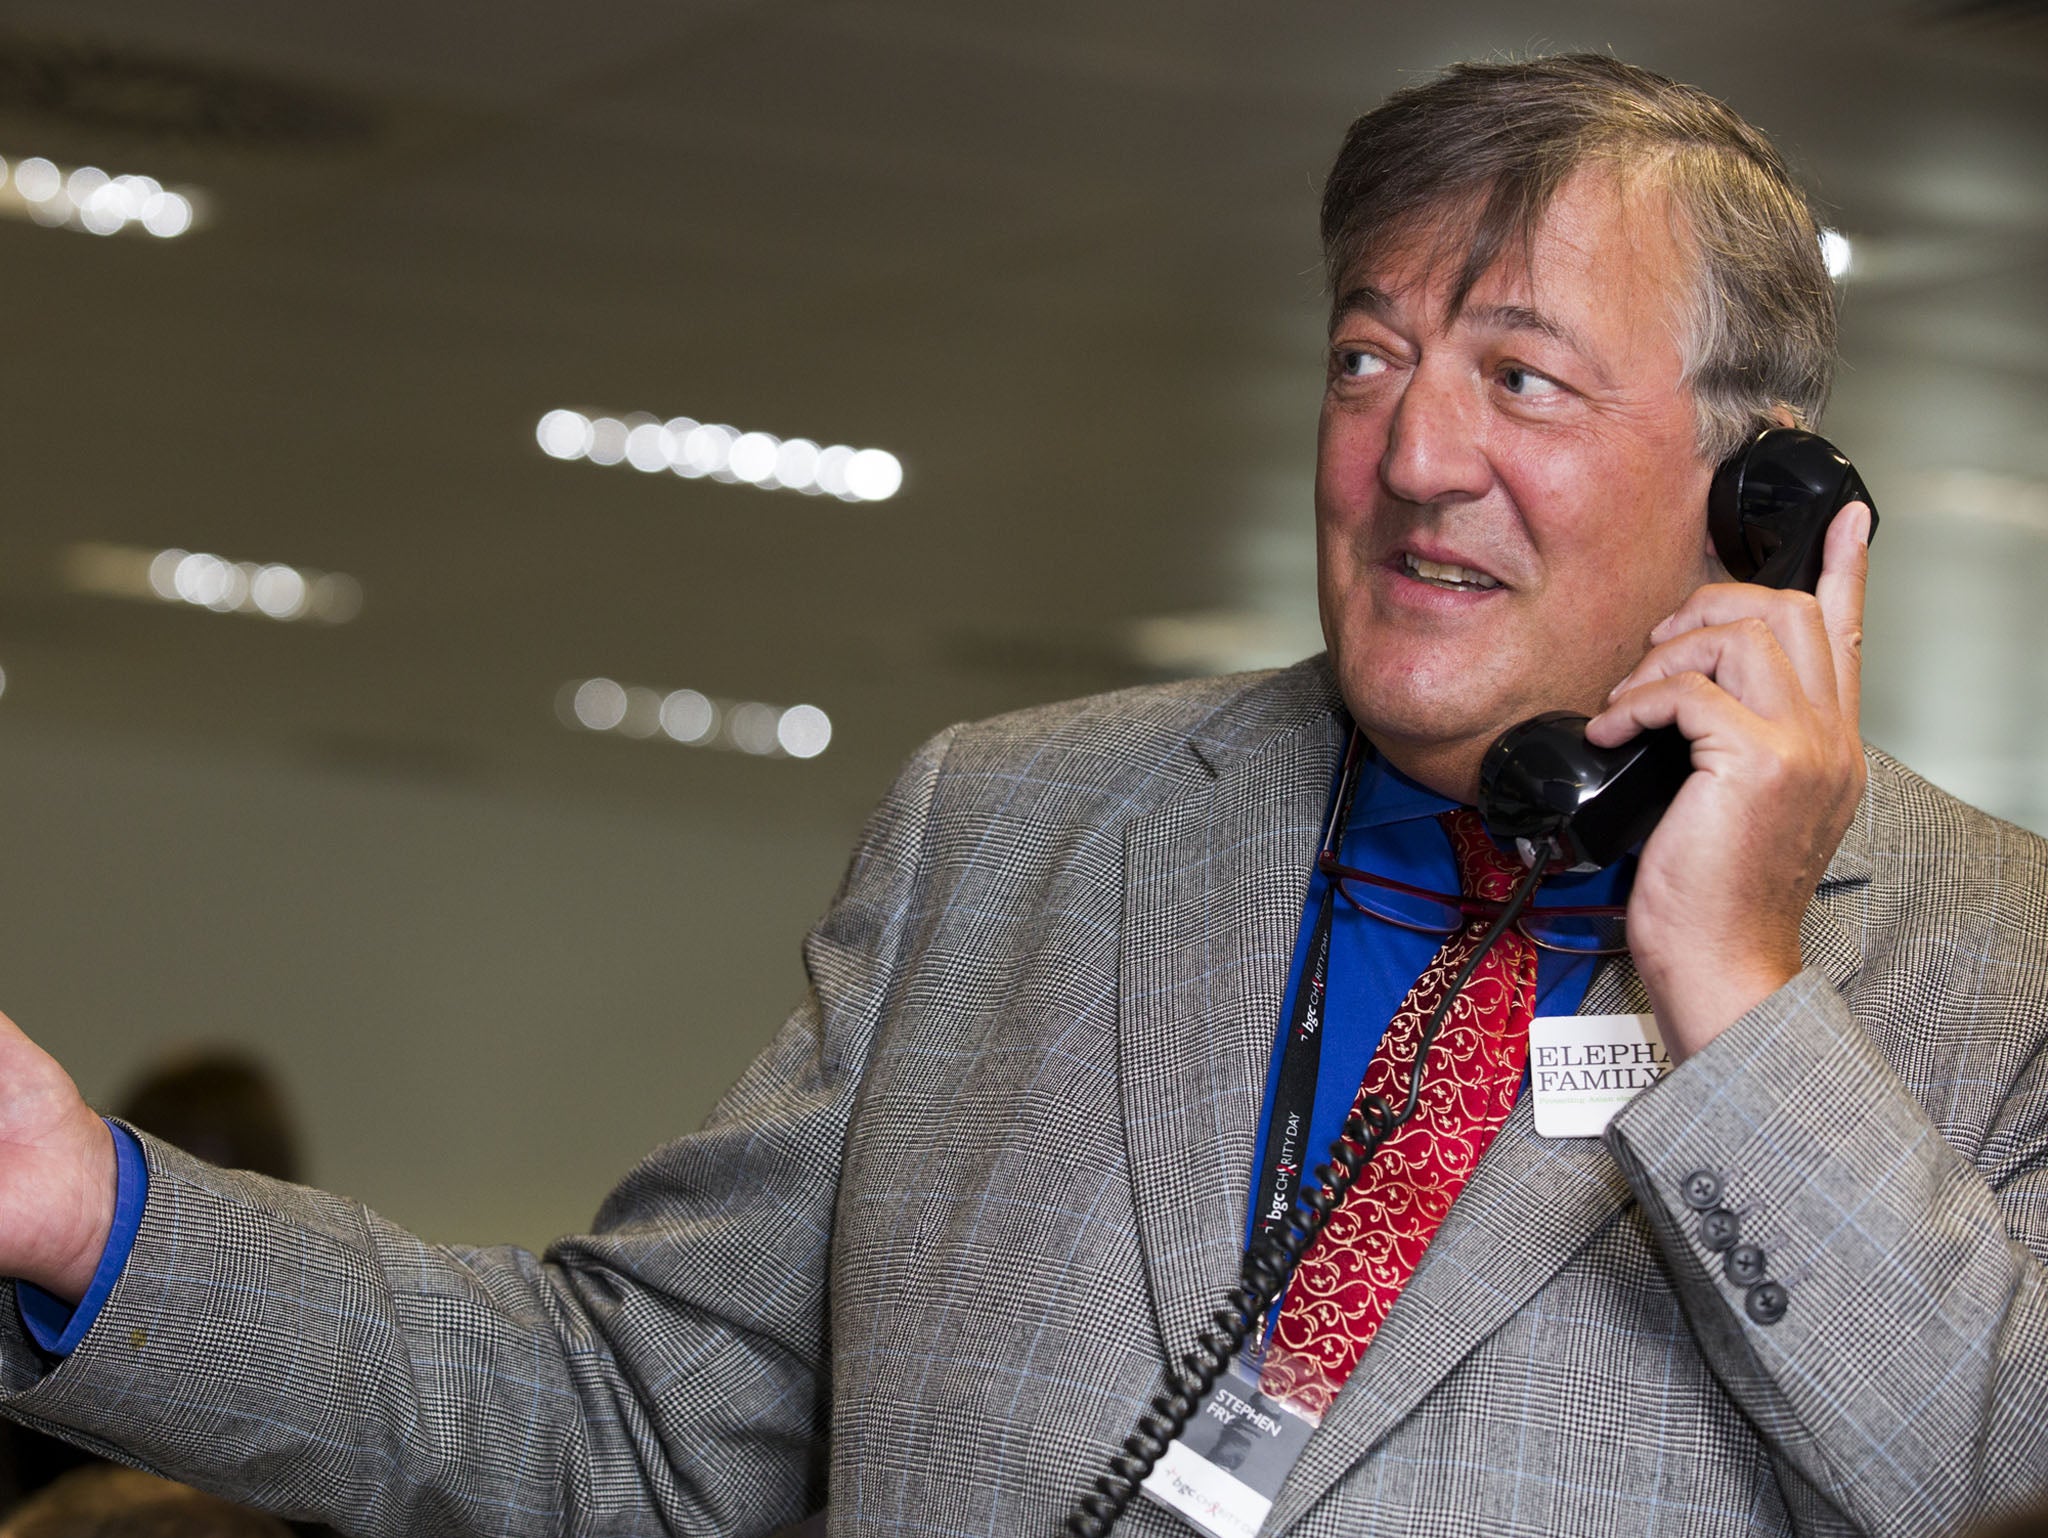 Stephen Fry, life-long Apple lover, reviews the iPhone 6